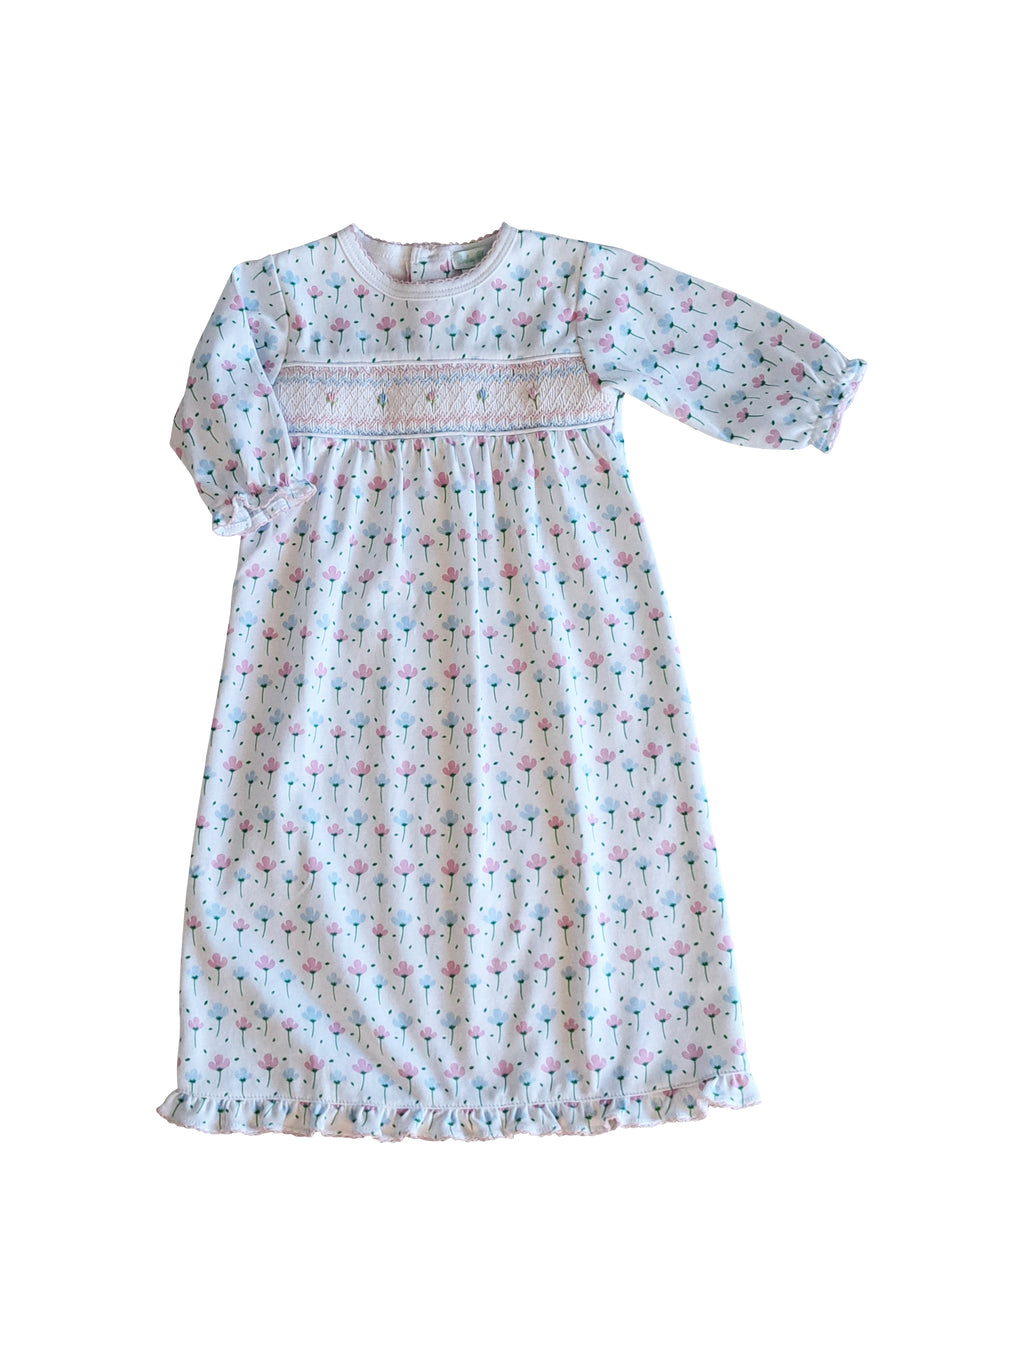 Buy Smocked Pima Cotton Baby Clothes - Little Threads Inc. – Little ...